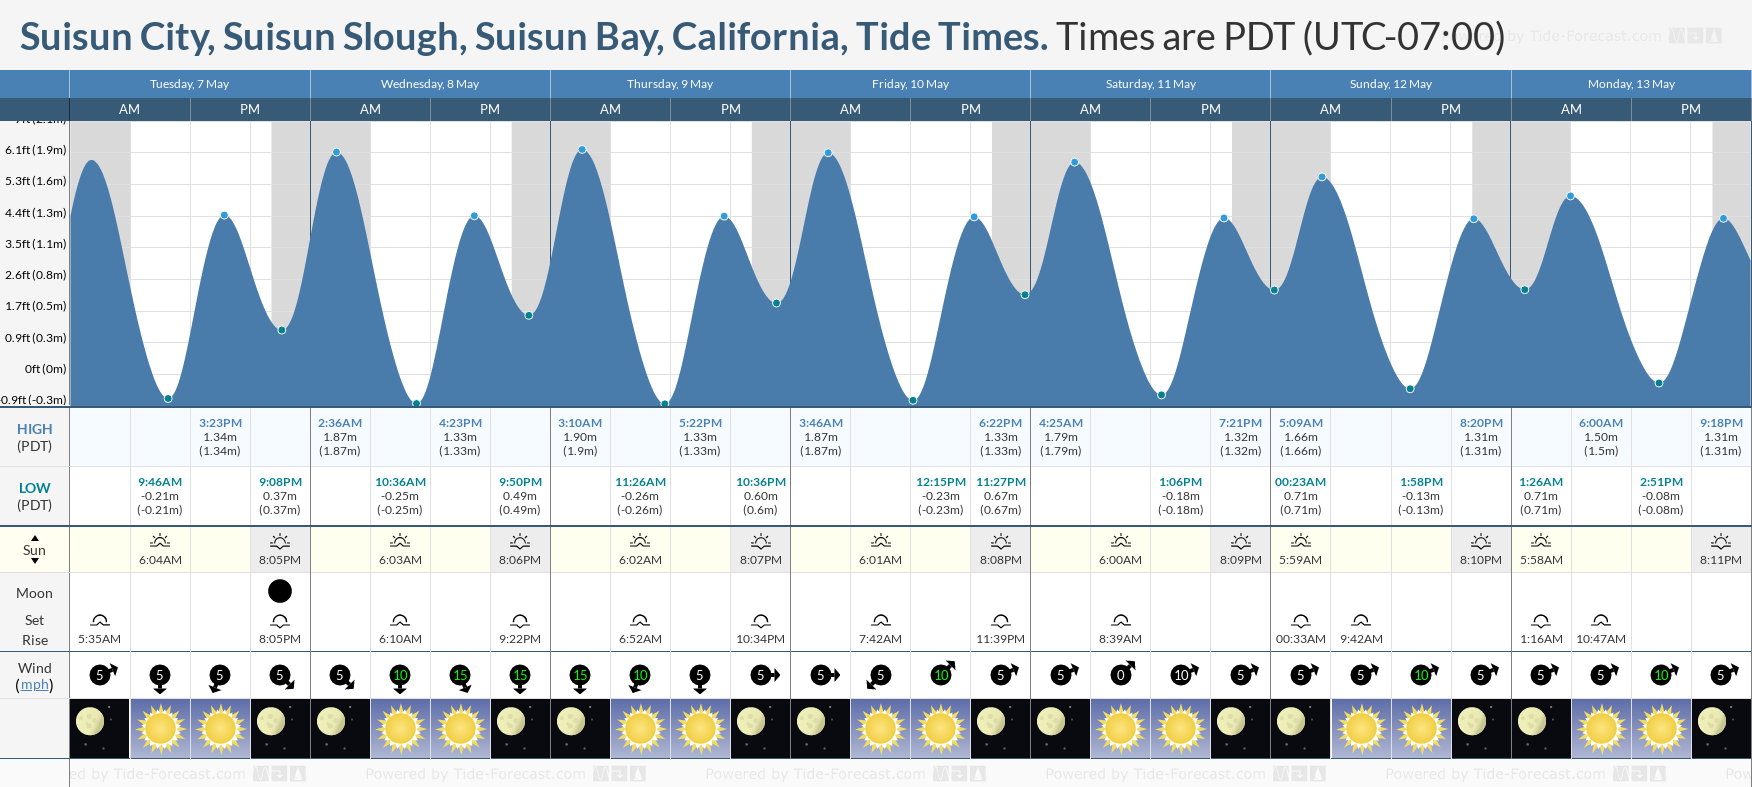 Suisun City, Suisun Slough, Suisun Bay, California Tide Chart including high and low tide tide times for the next 7 days